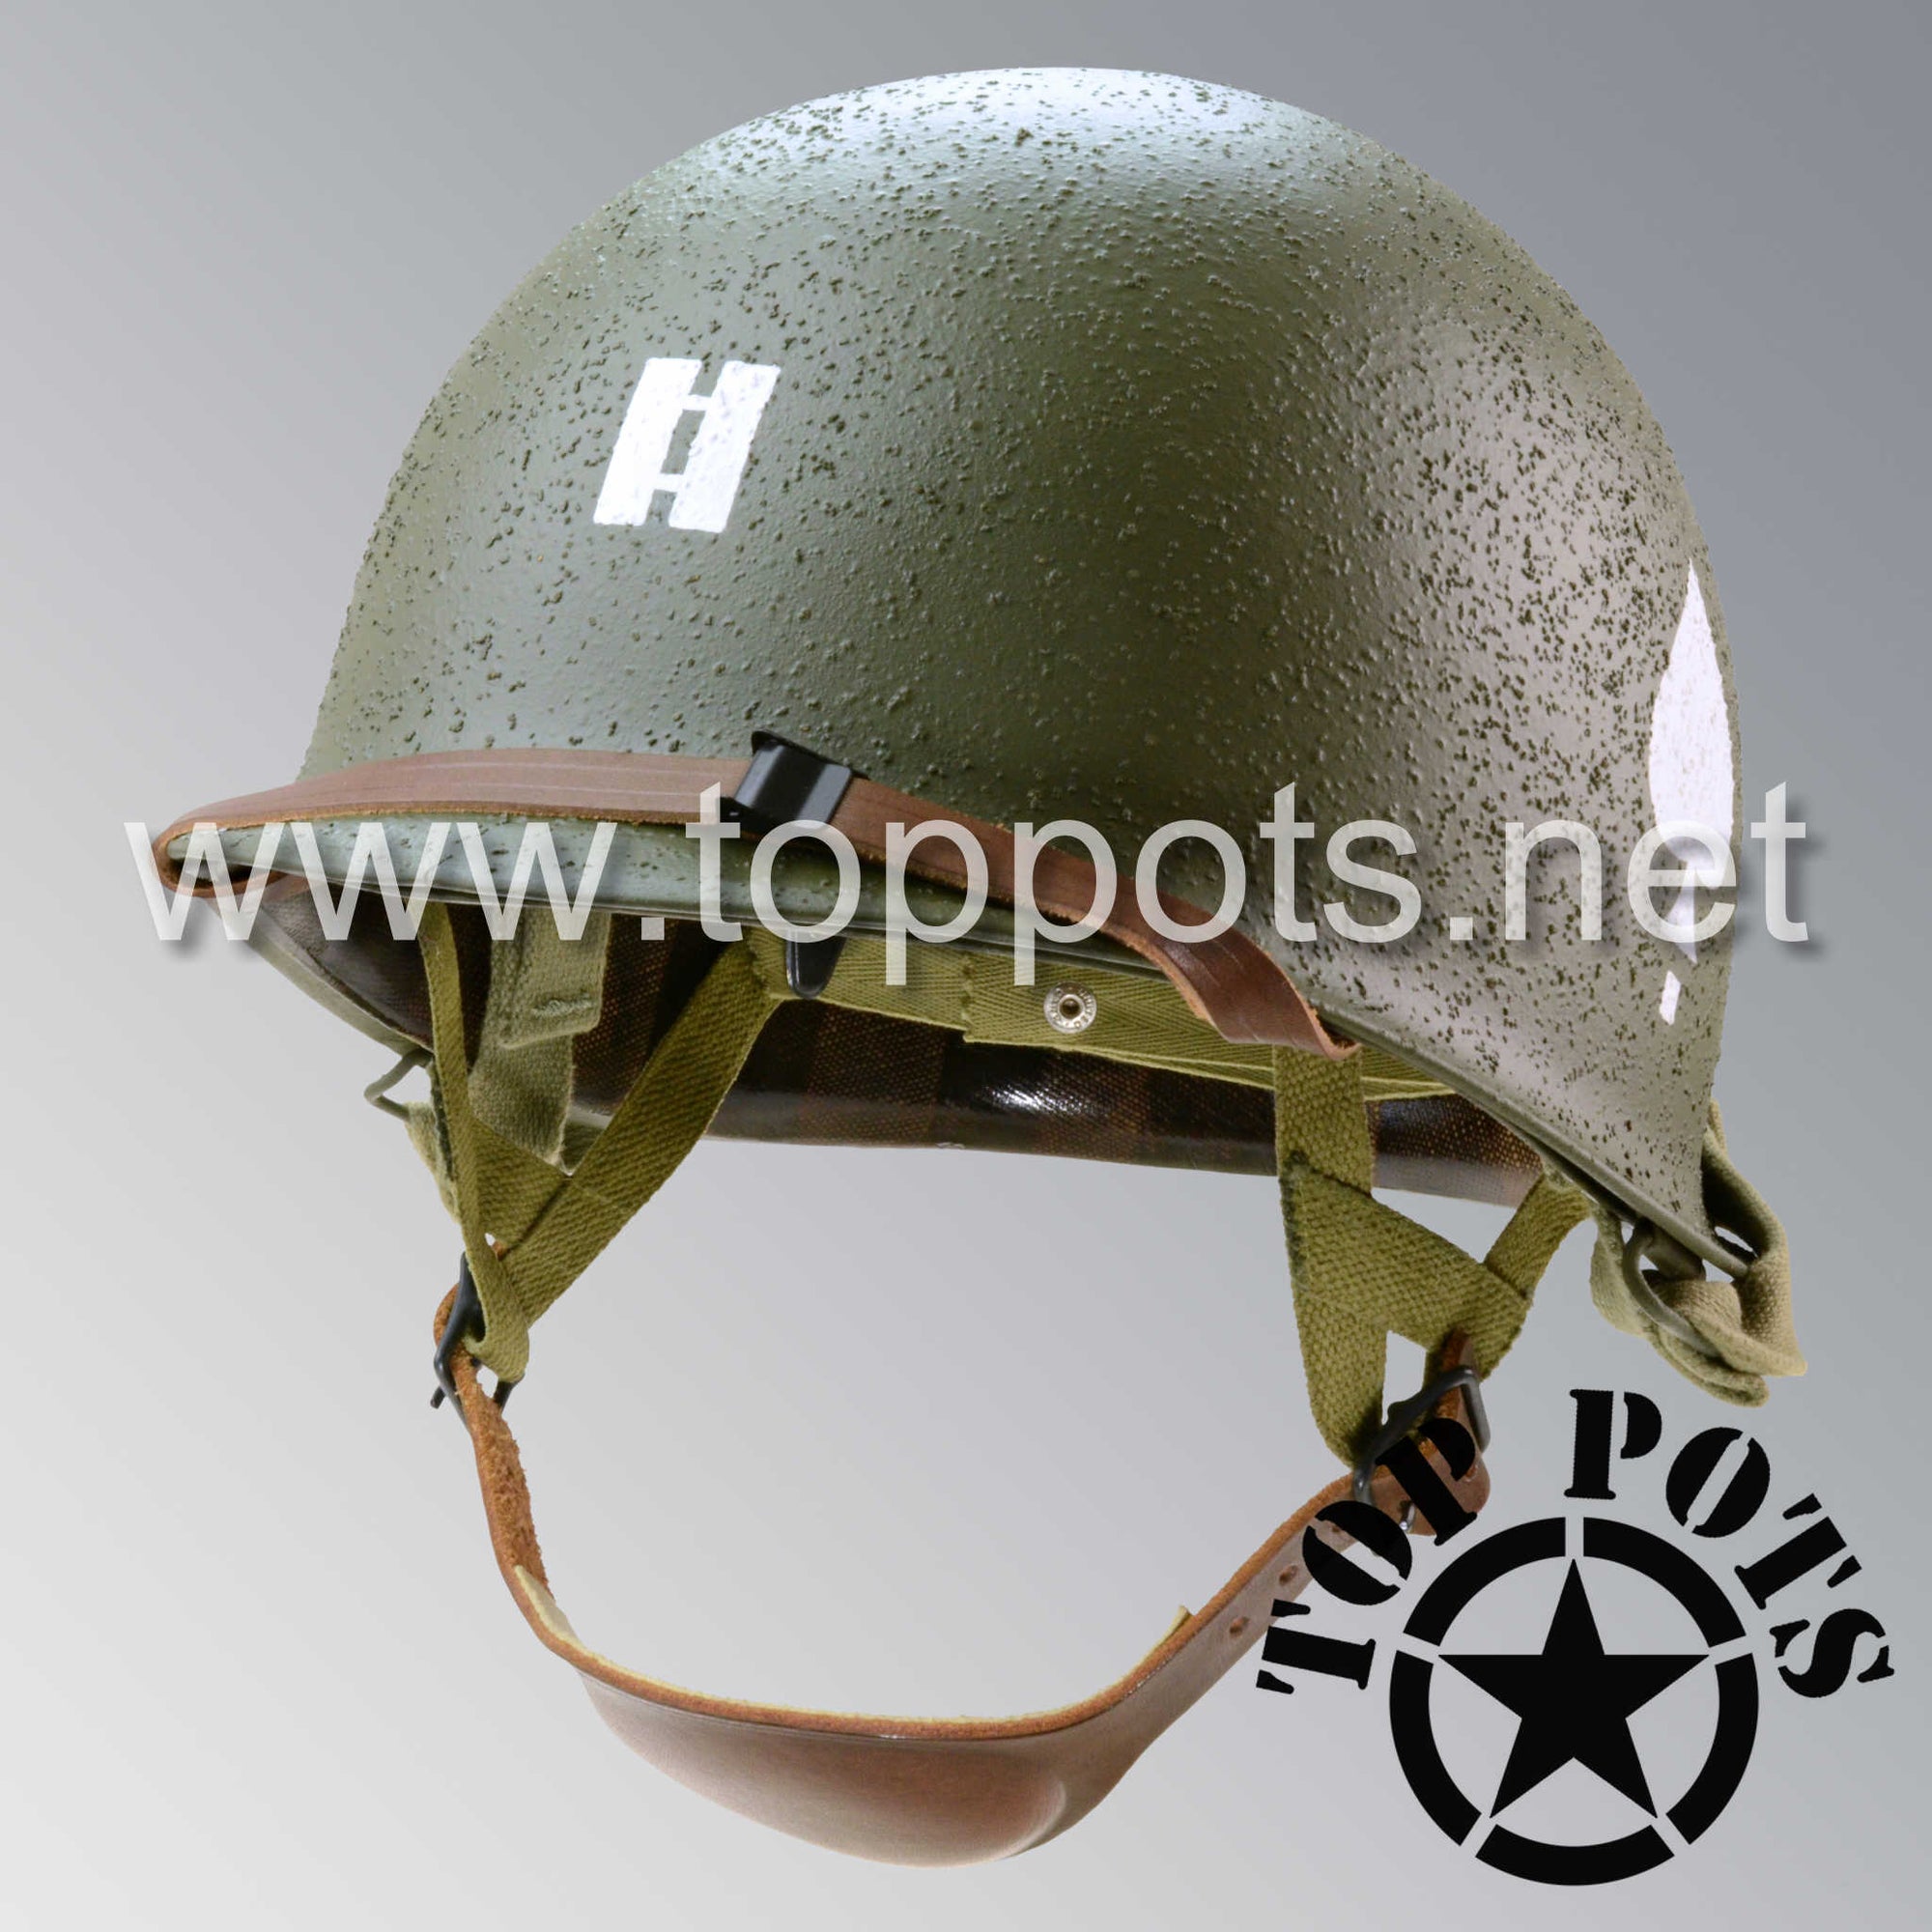 WWII US Army Restored Original M1C Paratrooper Airborne Helmet Swivel Bale Shell and Liner with 506th 2nd Battalion PIR Officer Captain Emblem